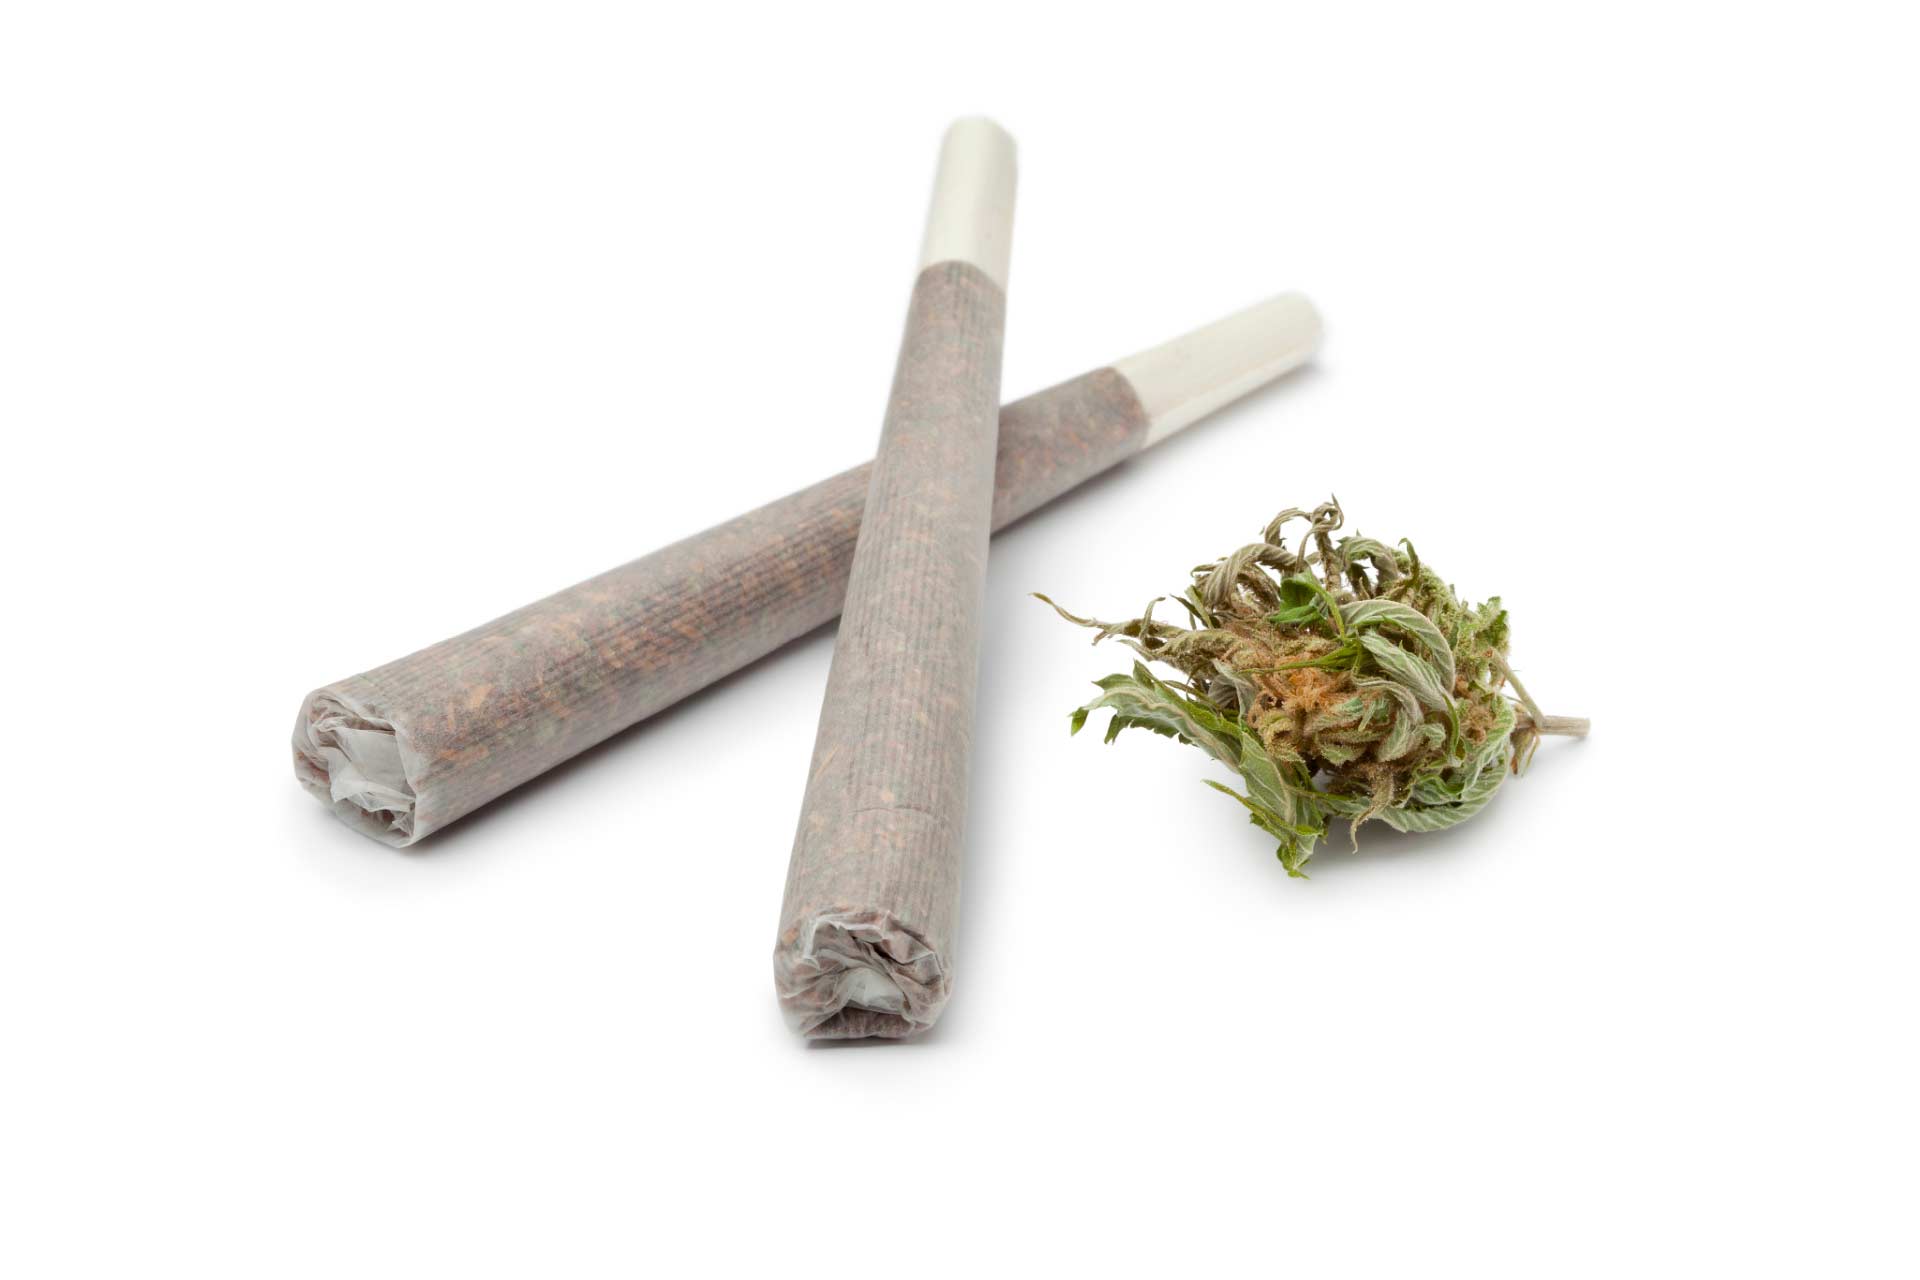 Cannabis pre-roll joints and cannabis flower on a white background.